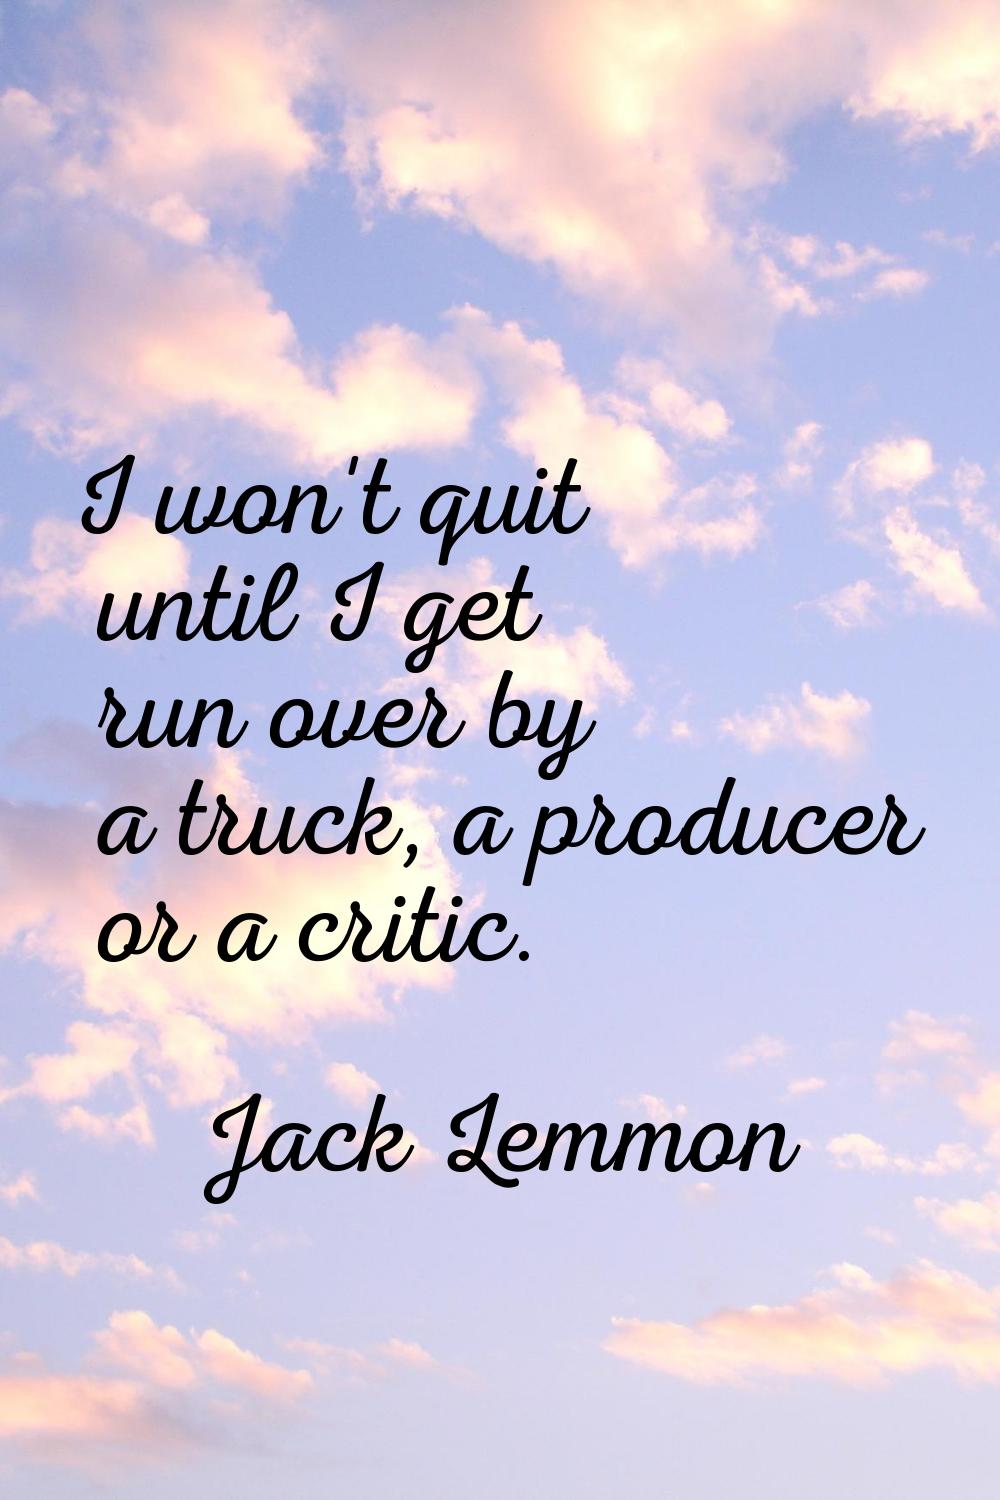 I won't quit until I get run over by a truck, a producer or a critic.